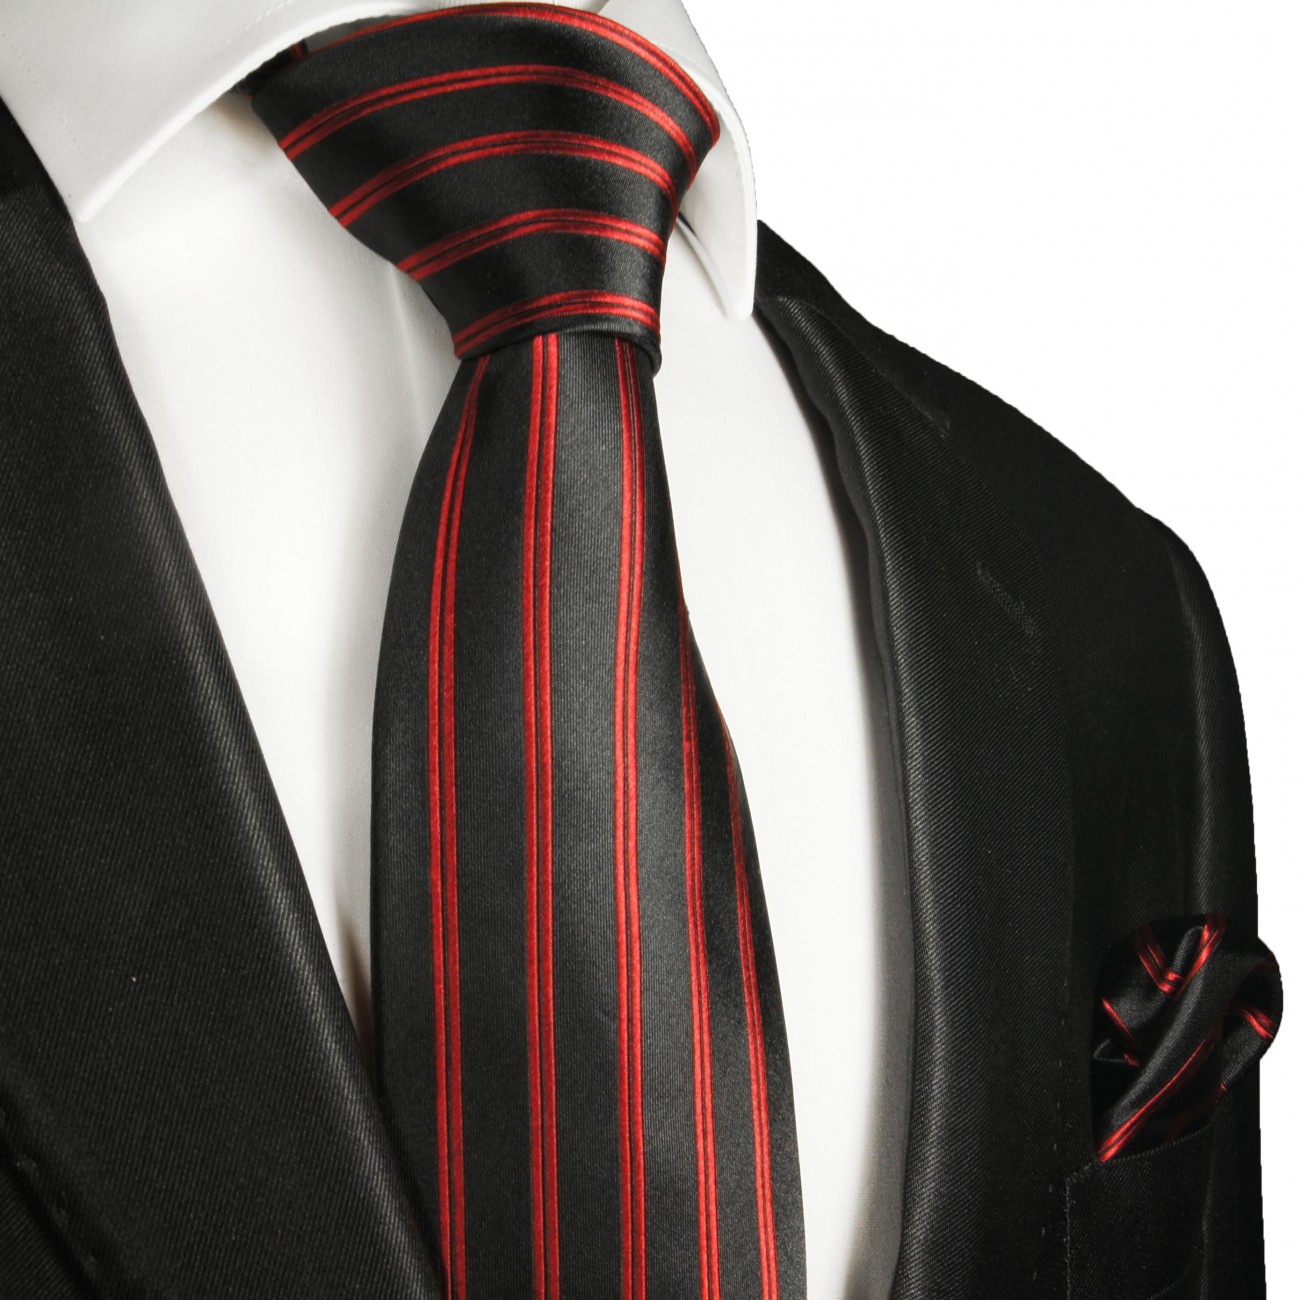 Men’s Tie & Handkerchief Set Two Shade Red with White Stripe LUC281 